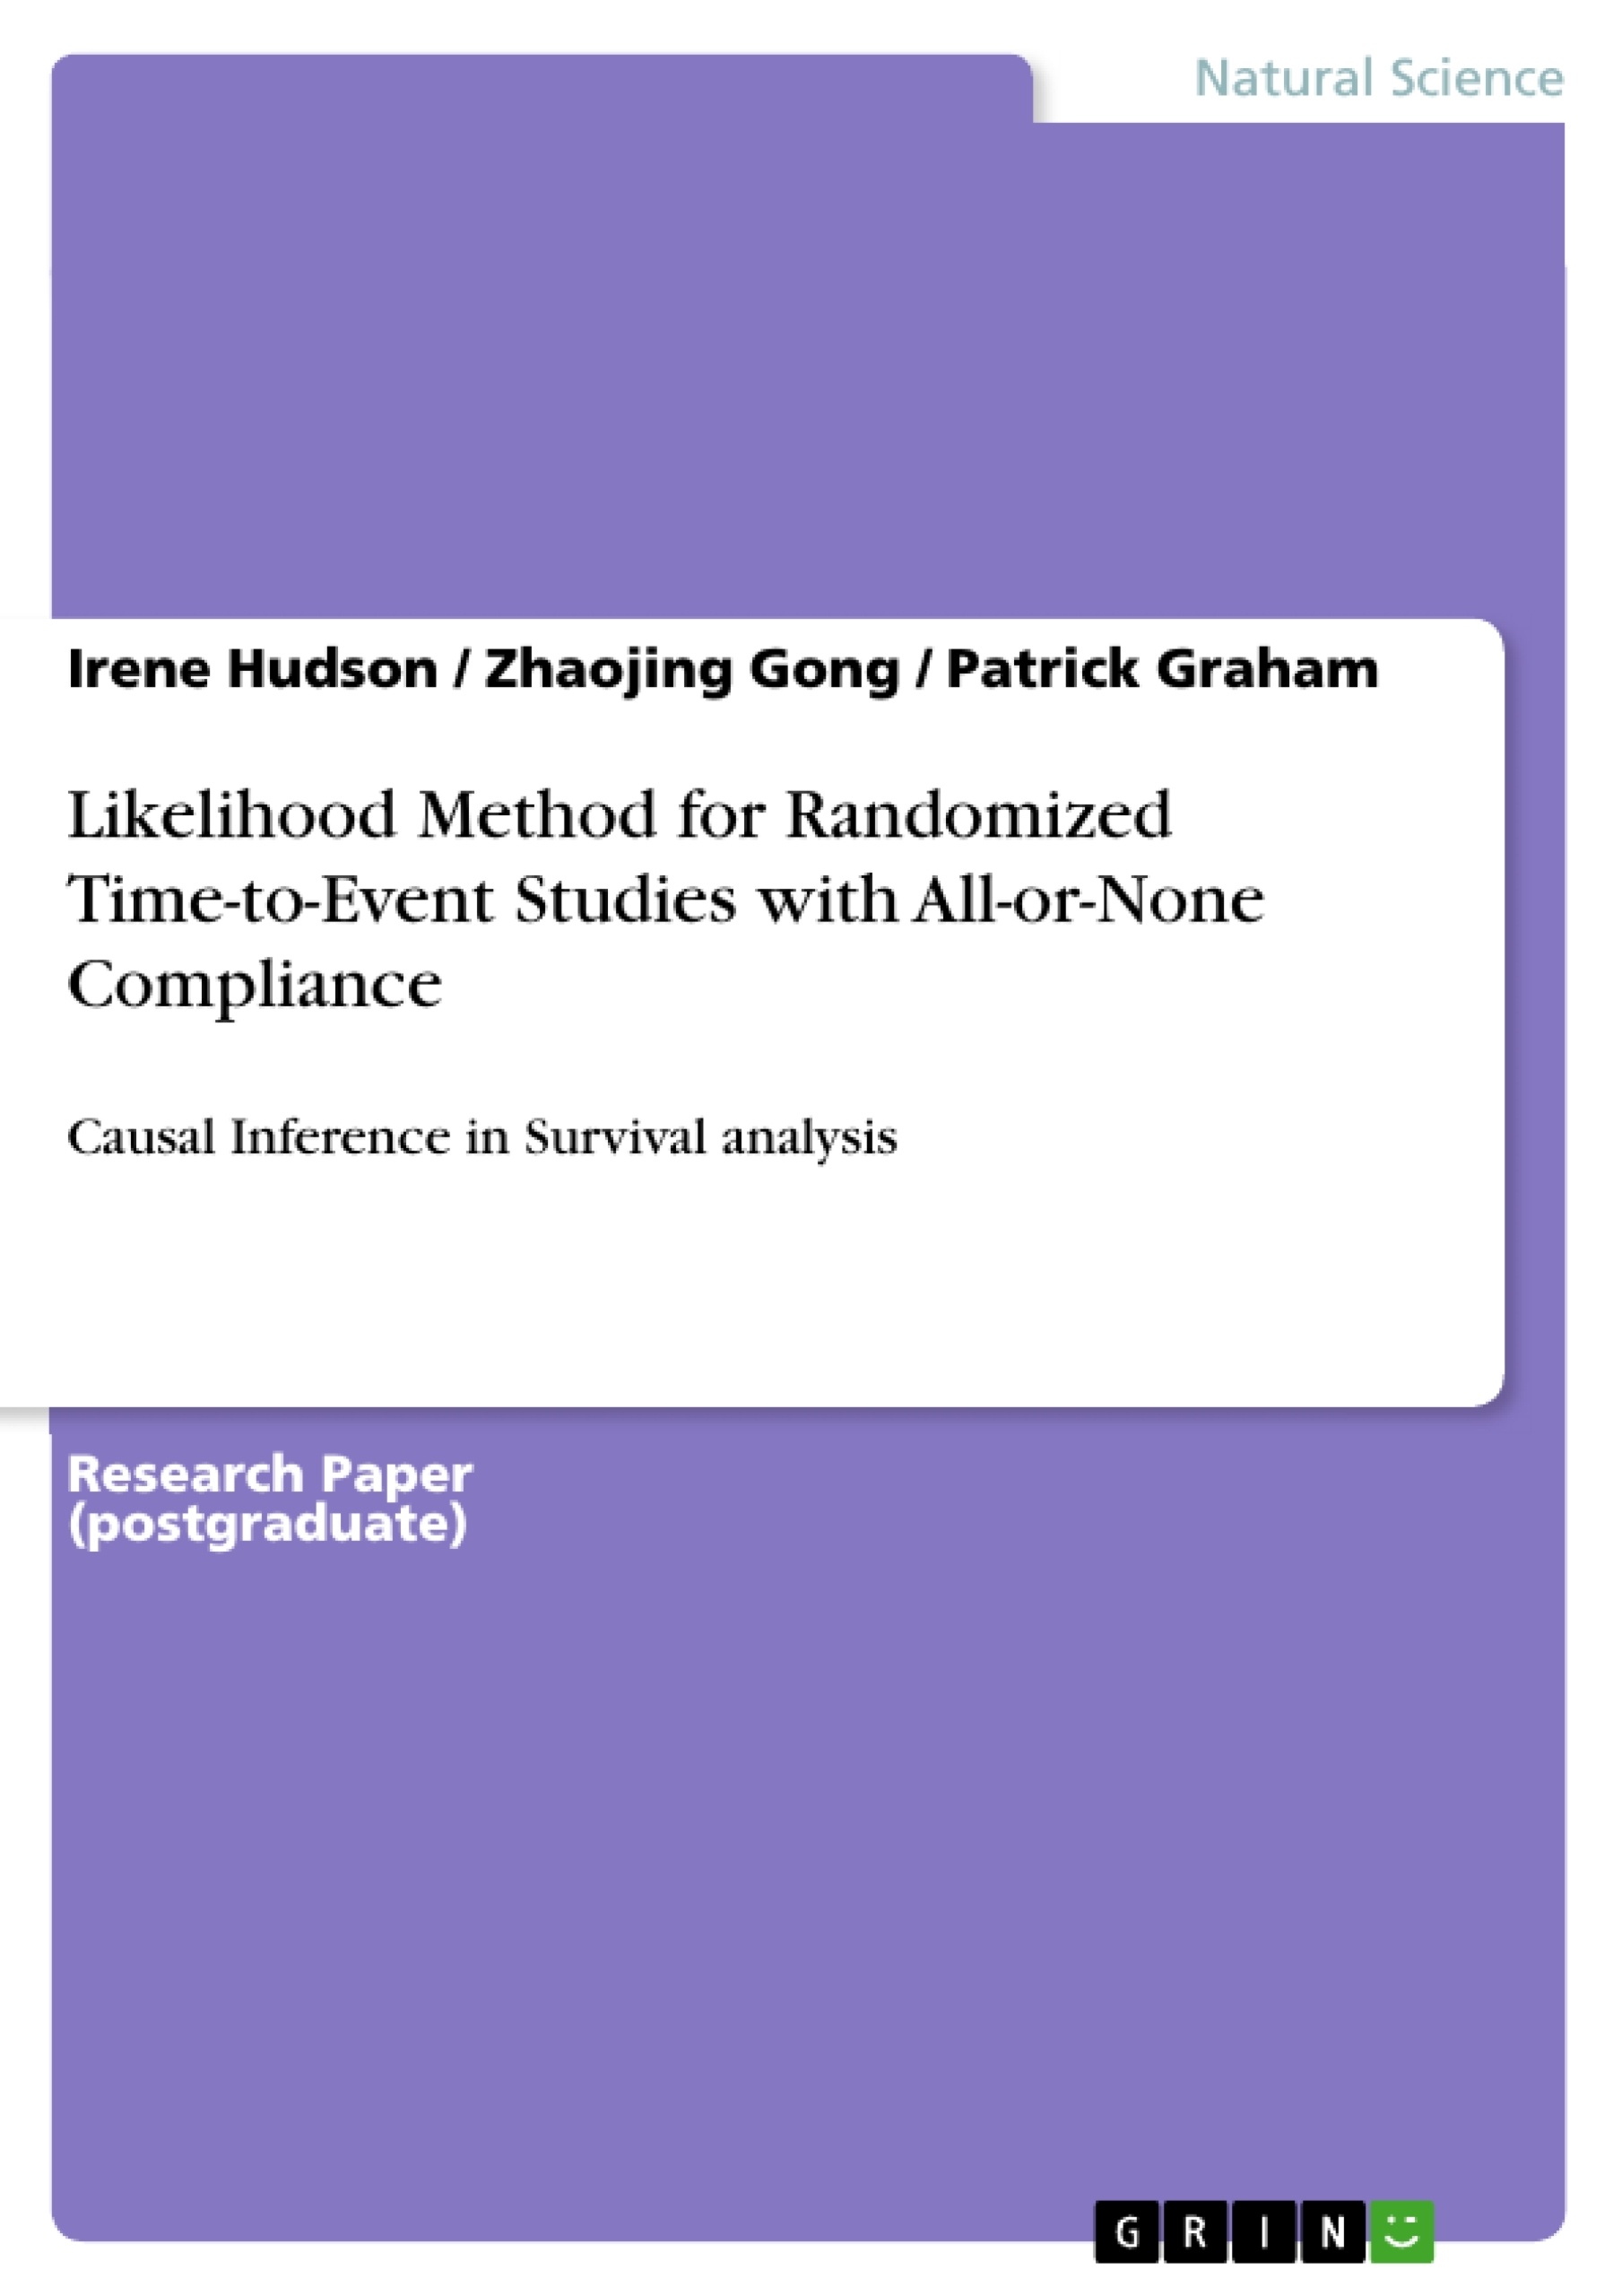 Título: Likelihood Method for Randomized Time-to-Event Studies with All-or-None Compliance